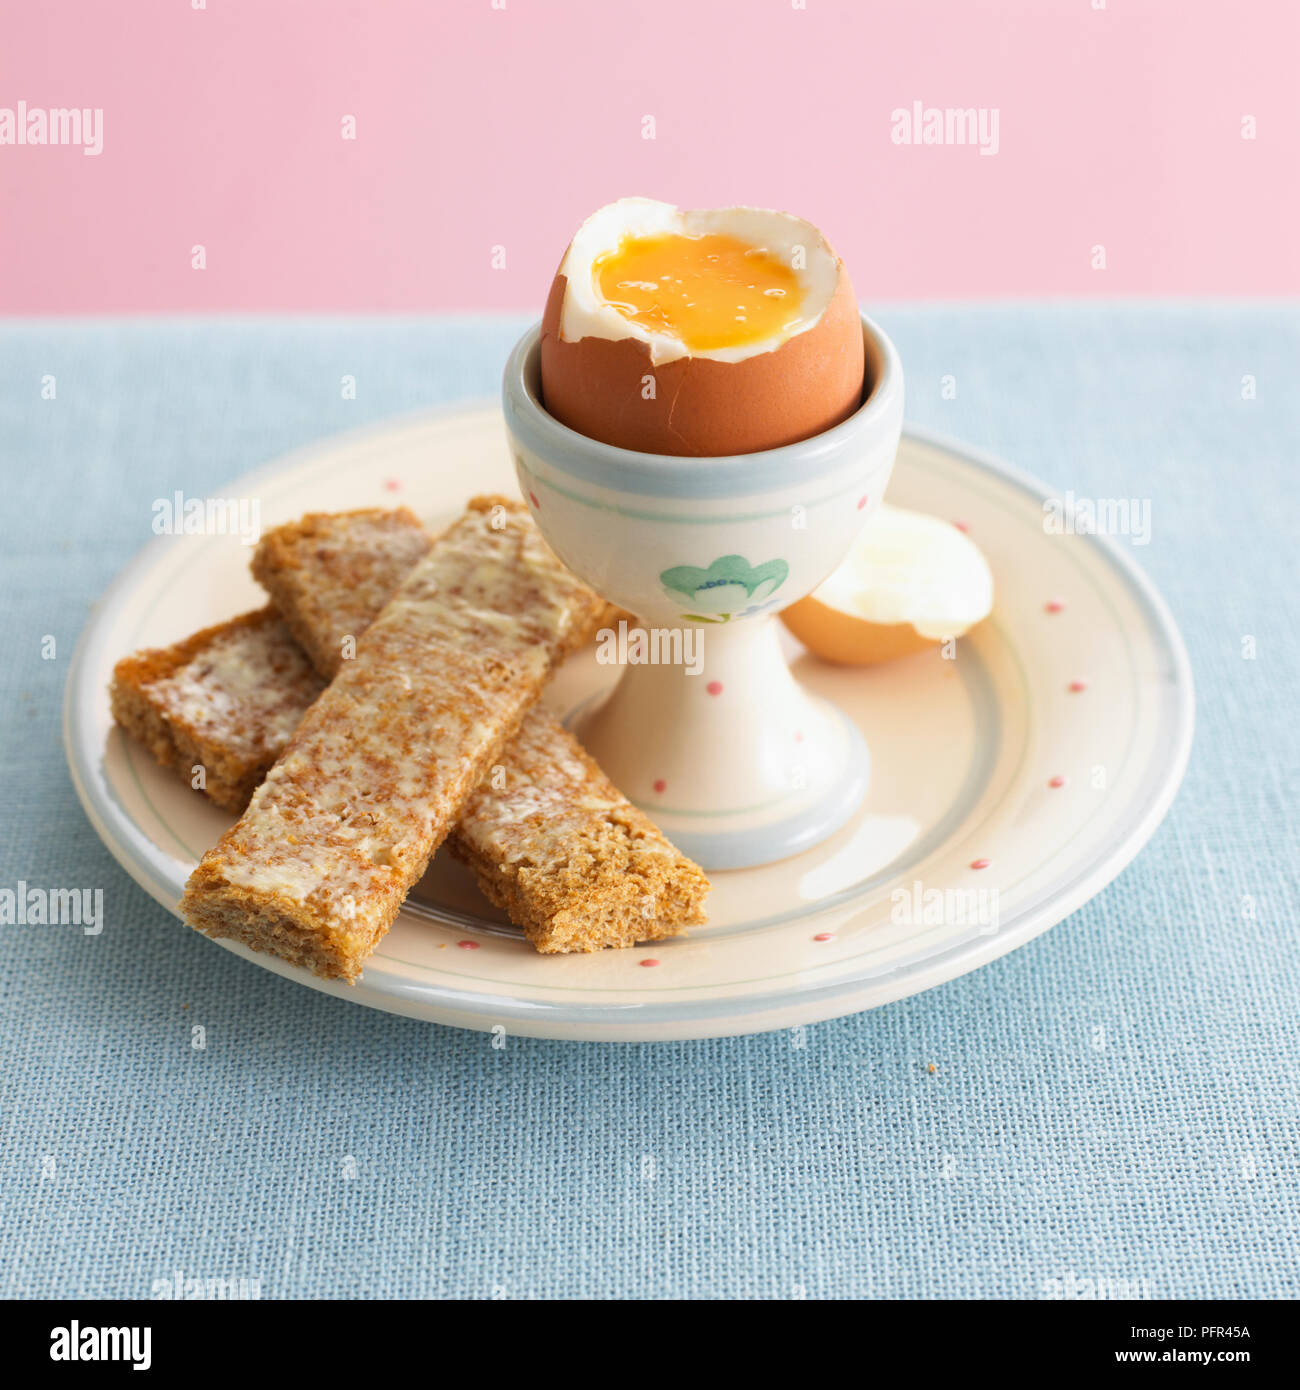 Boiled egg and sliced buttered toast Stock Photo